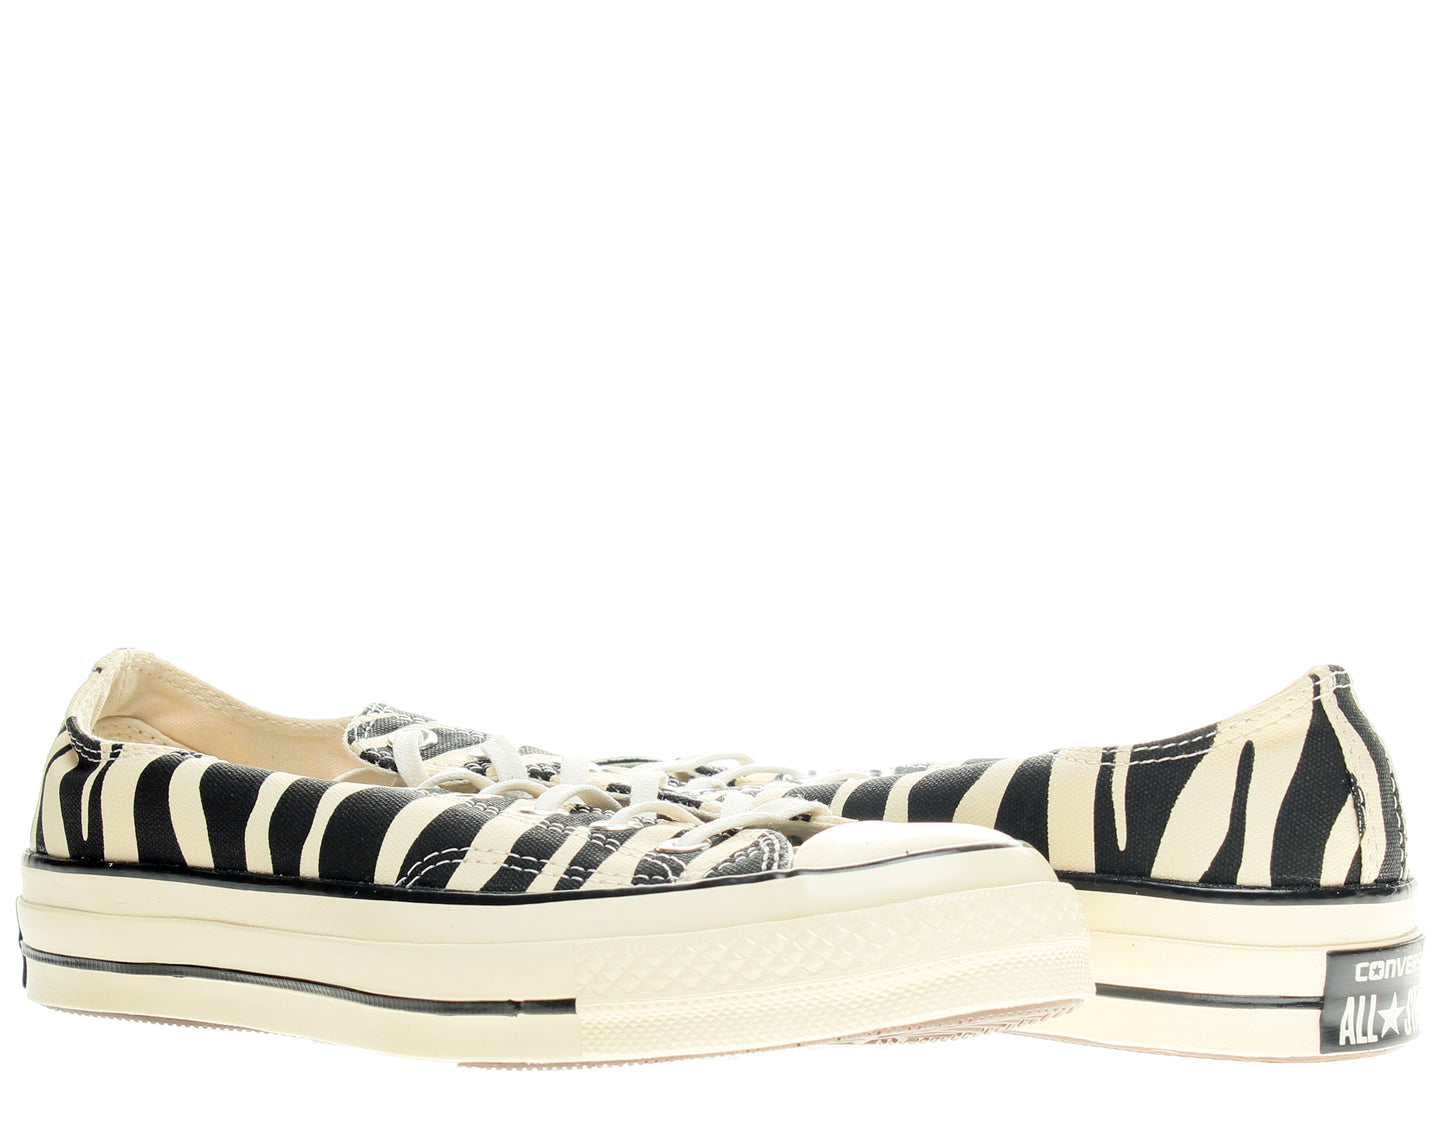 Converse Chuck Taylor All Star OX 70' Zebra Low top Sneakers